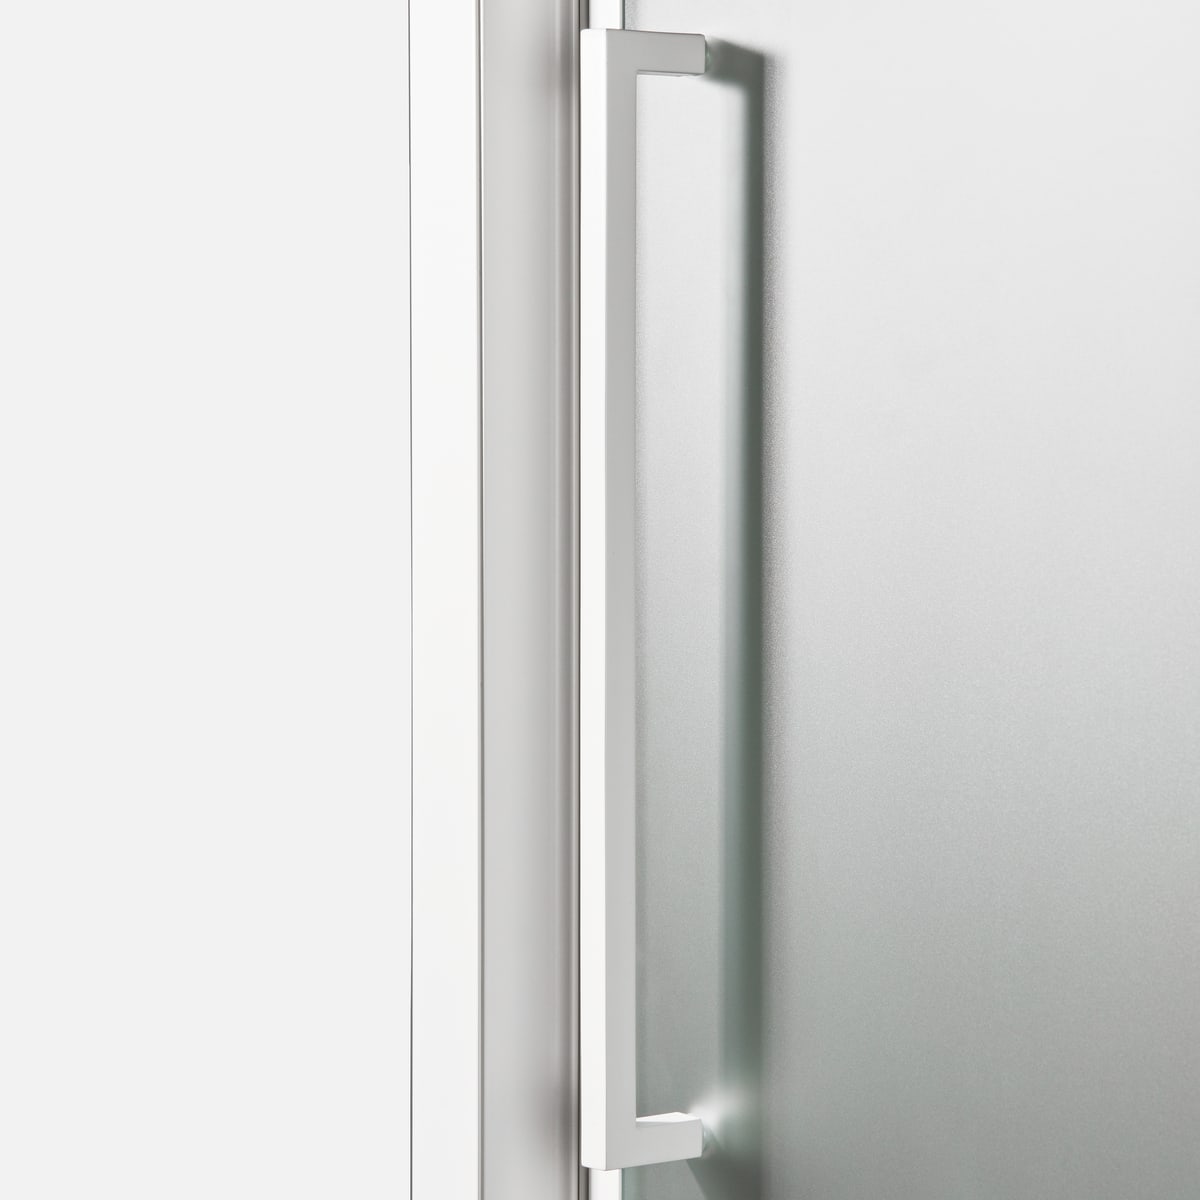 RECORD SWING DOOR L 92-96 H 195 CM CLEAR GLASS 6 MM WHITE